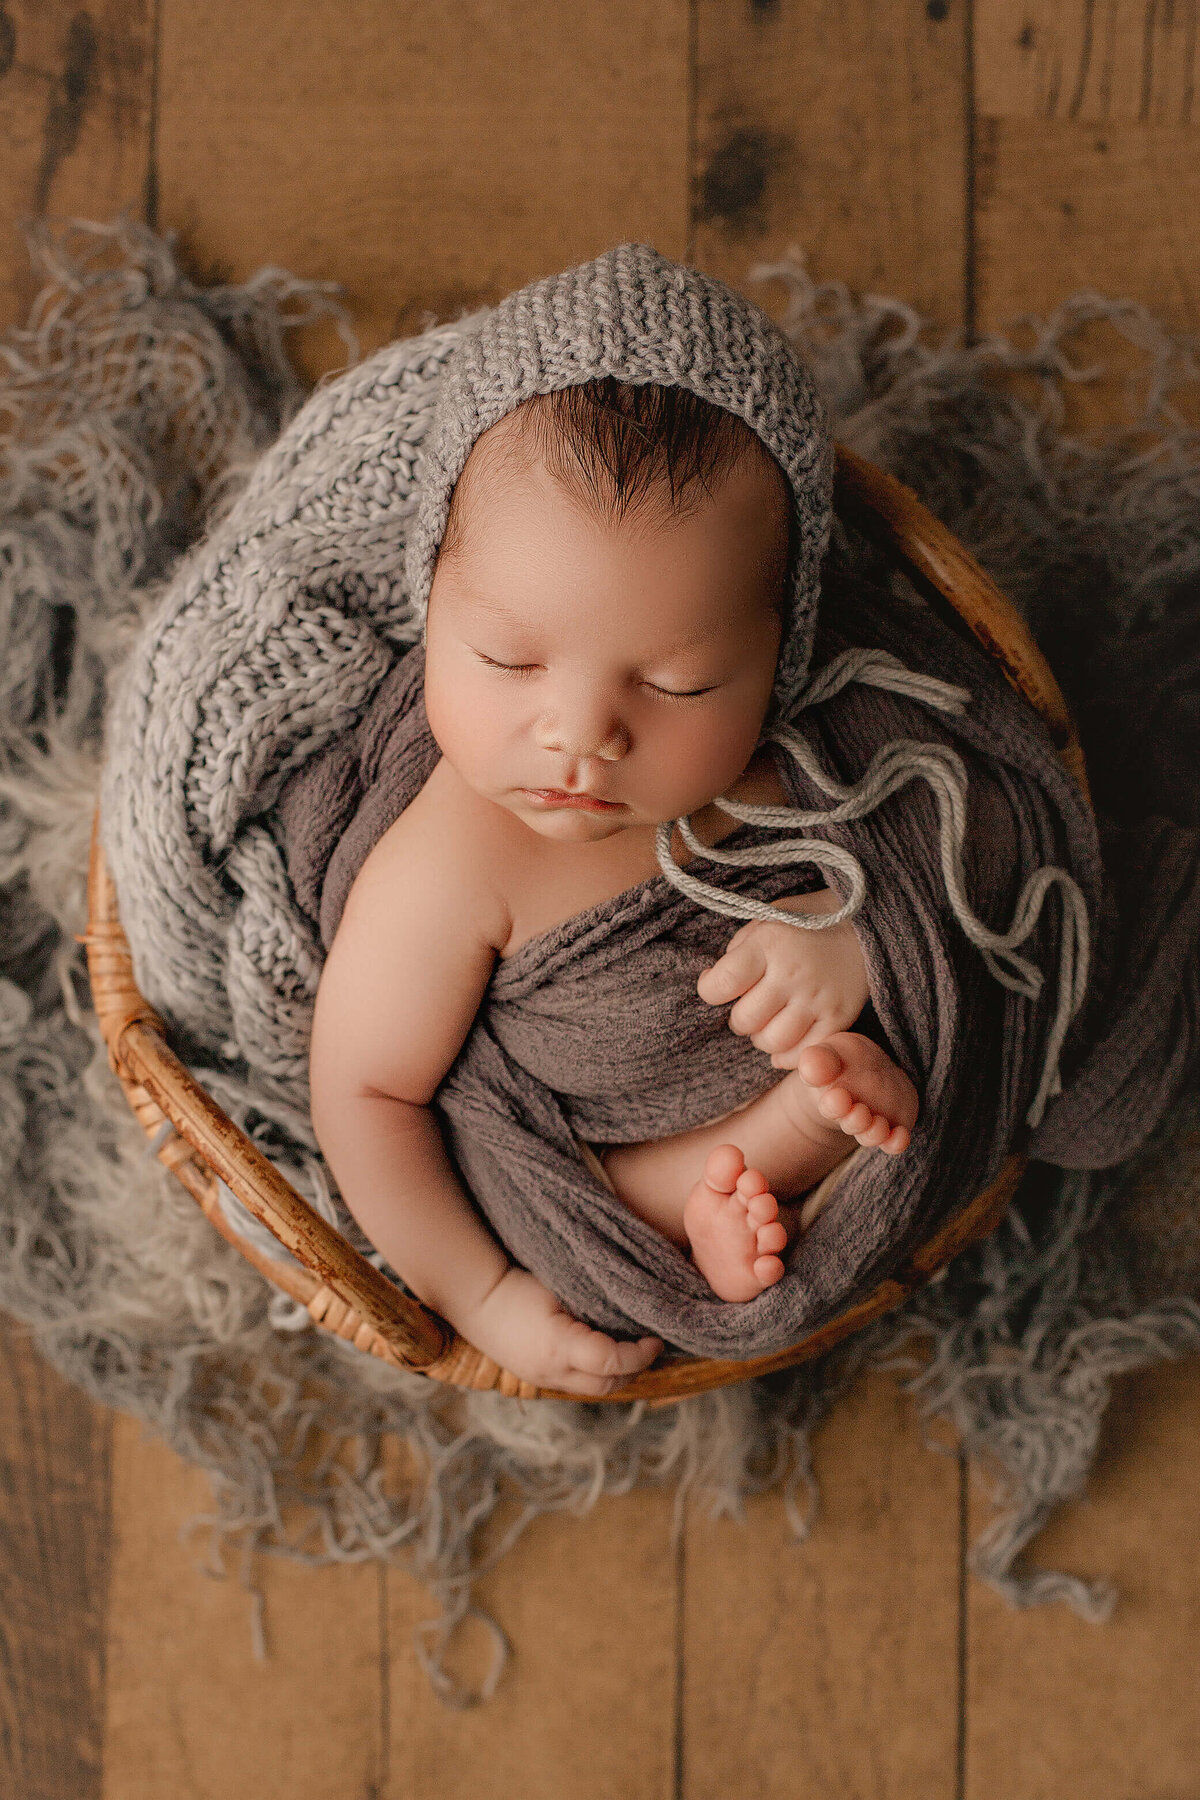 hamilton newborn photographer captures baby boy wrapped in grey cloth, sleeping in a bamboo basket